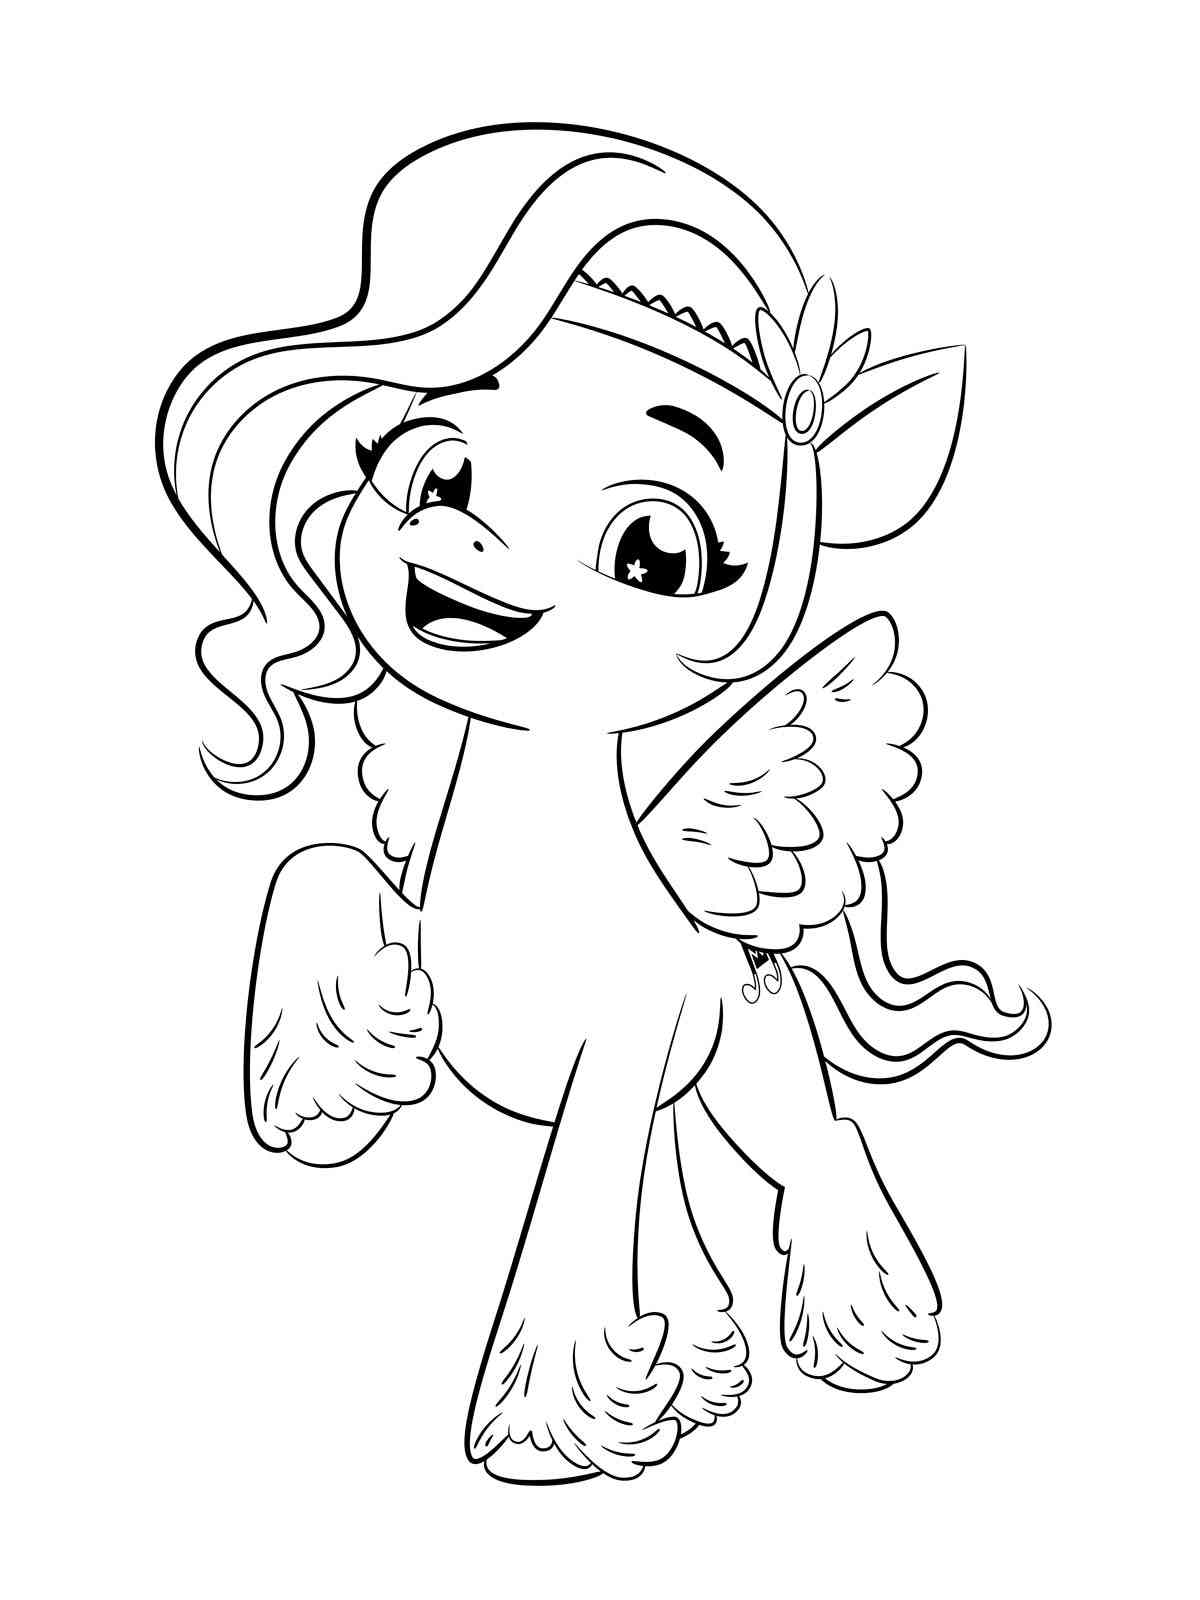 My Little Pony A New Generation coloring pages